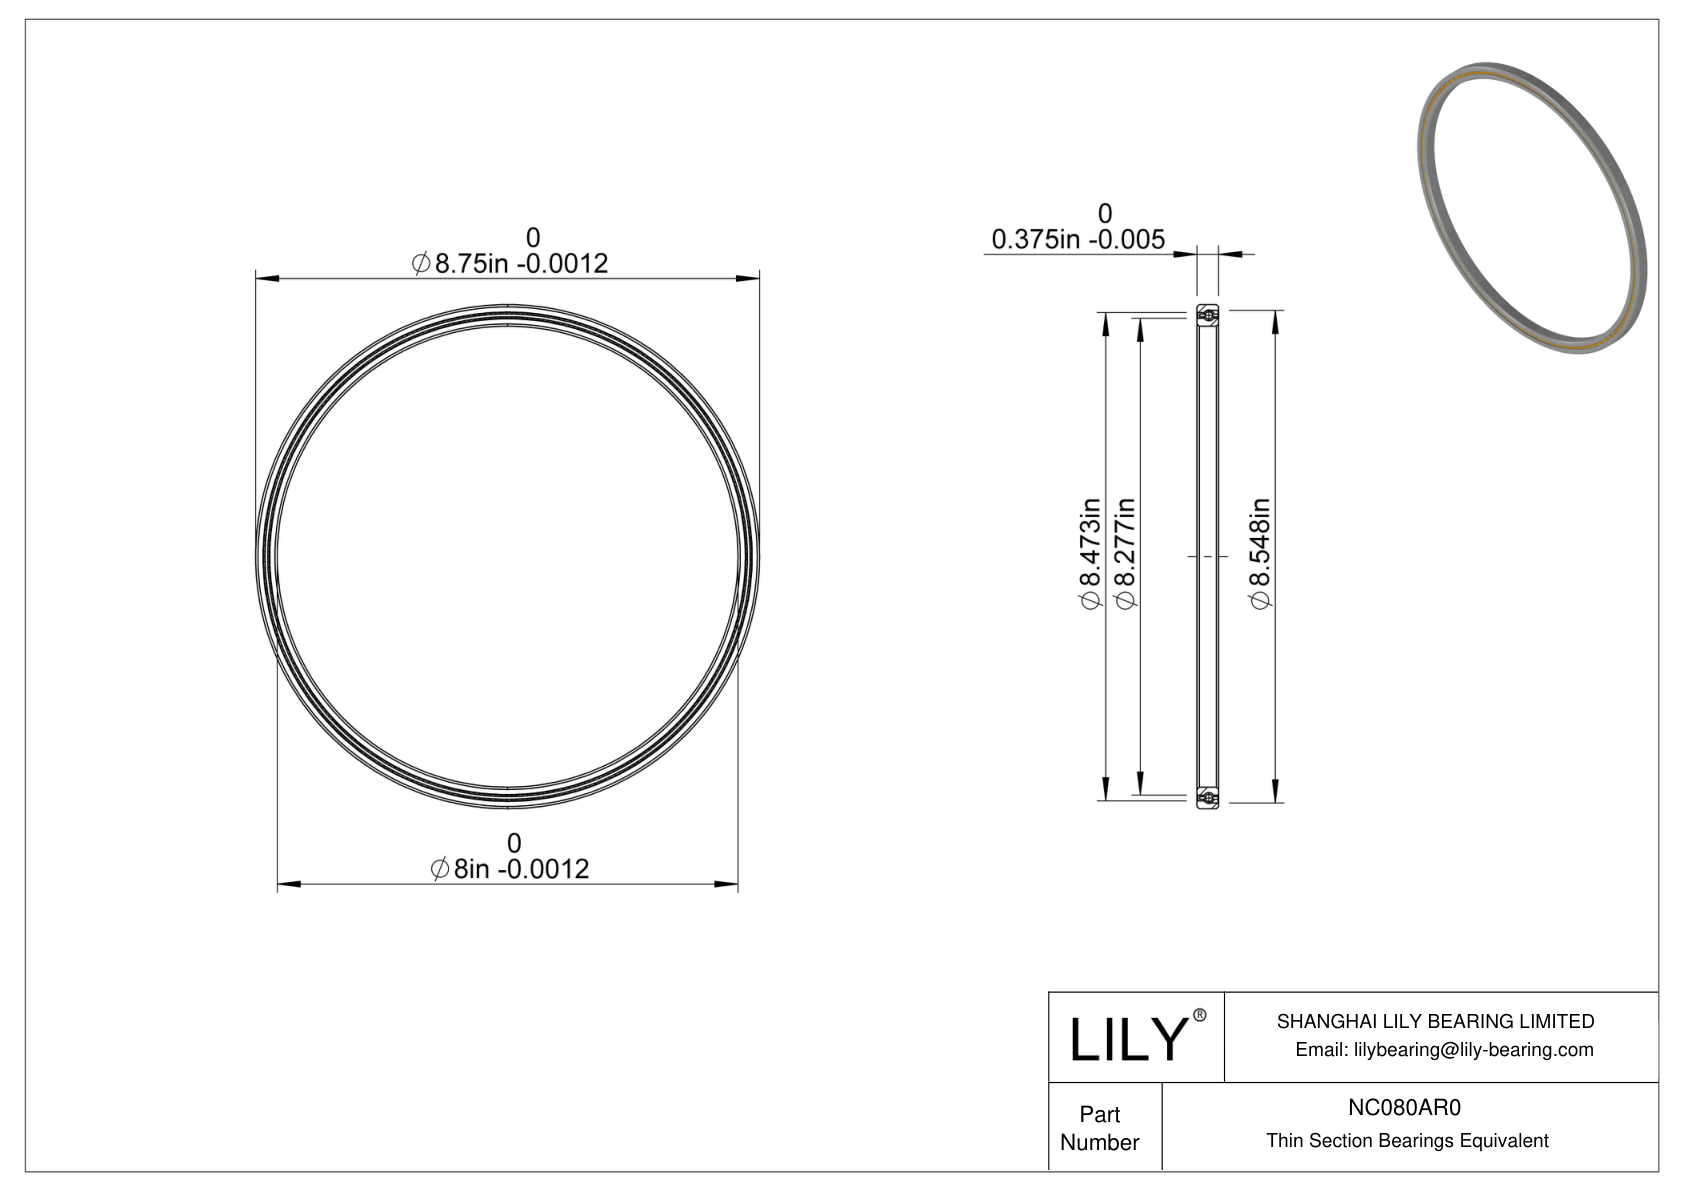 NC080AR0 Constant Section (CS) Bearings cad drawing